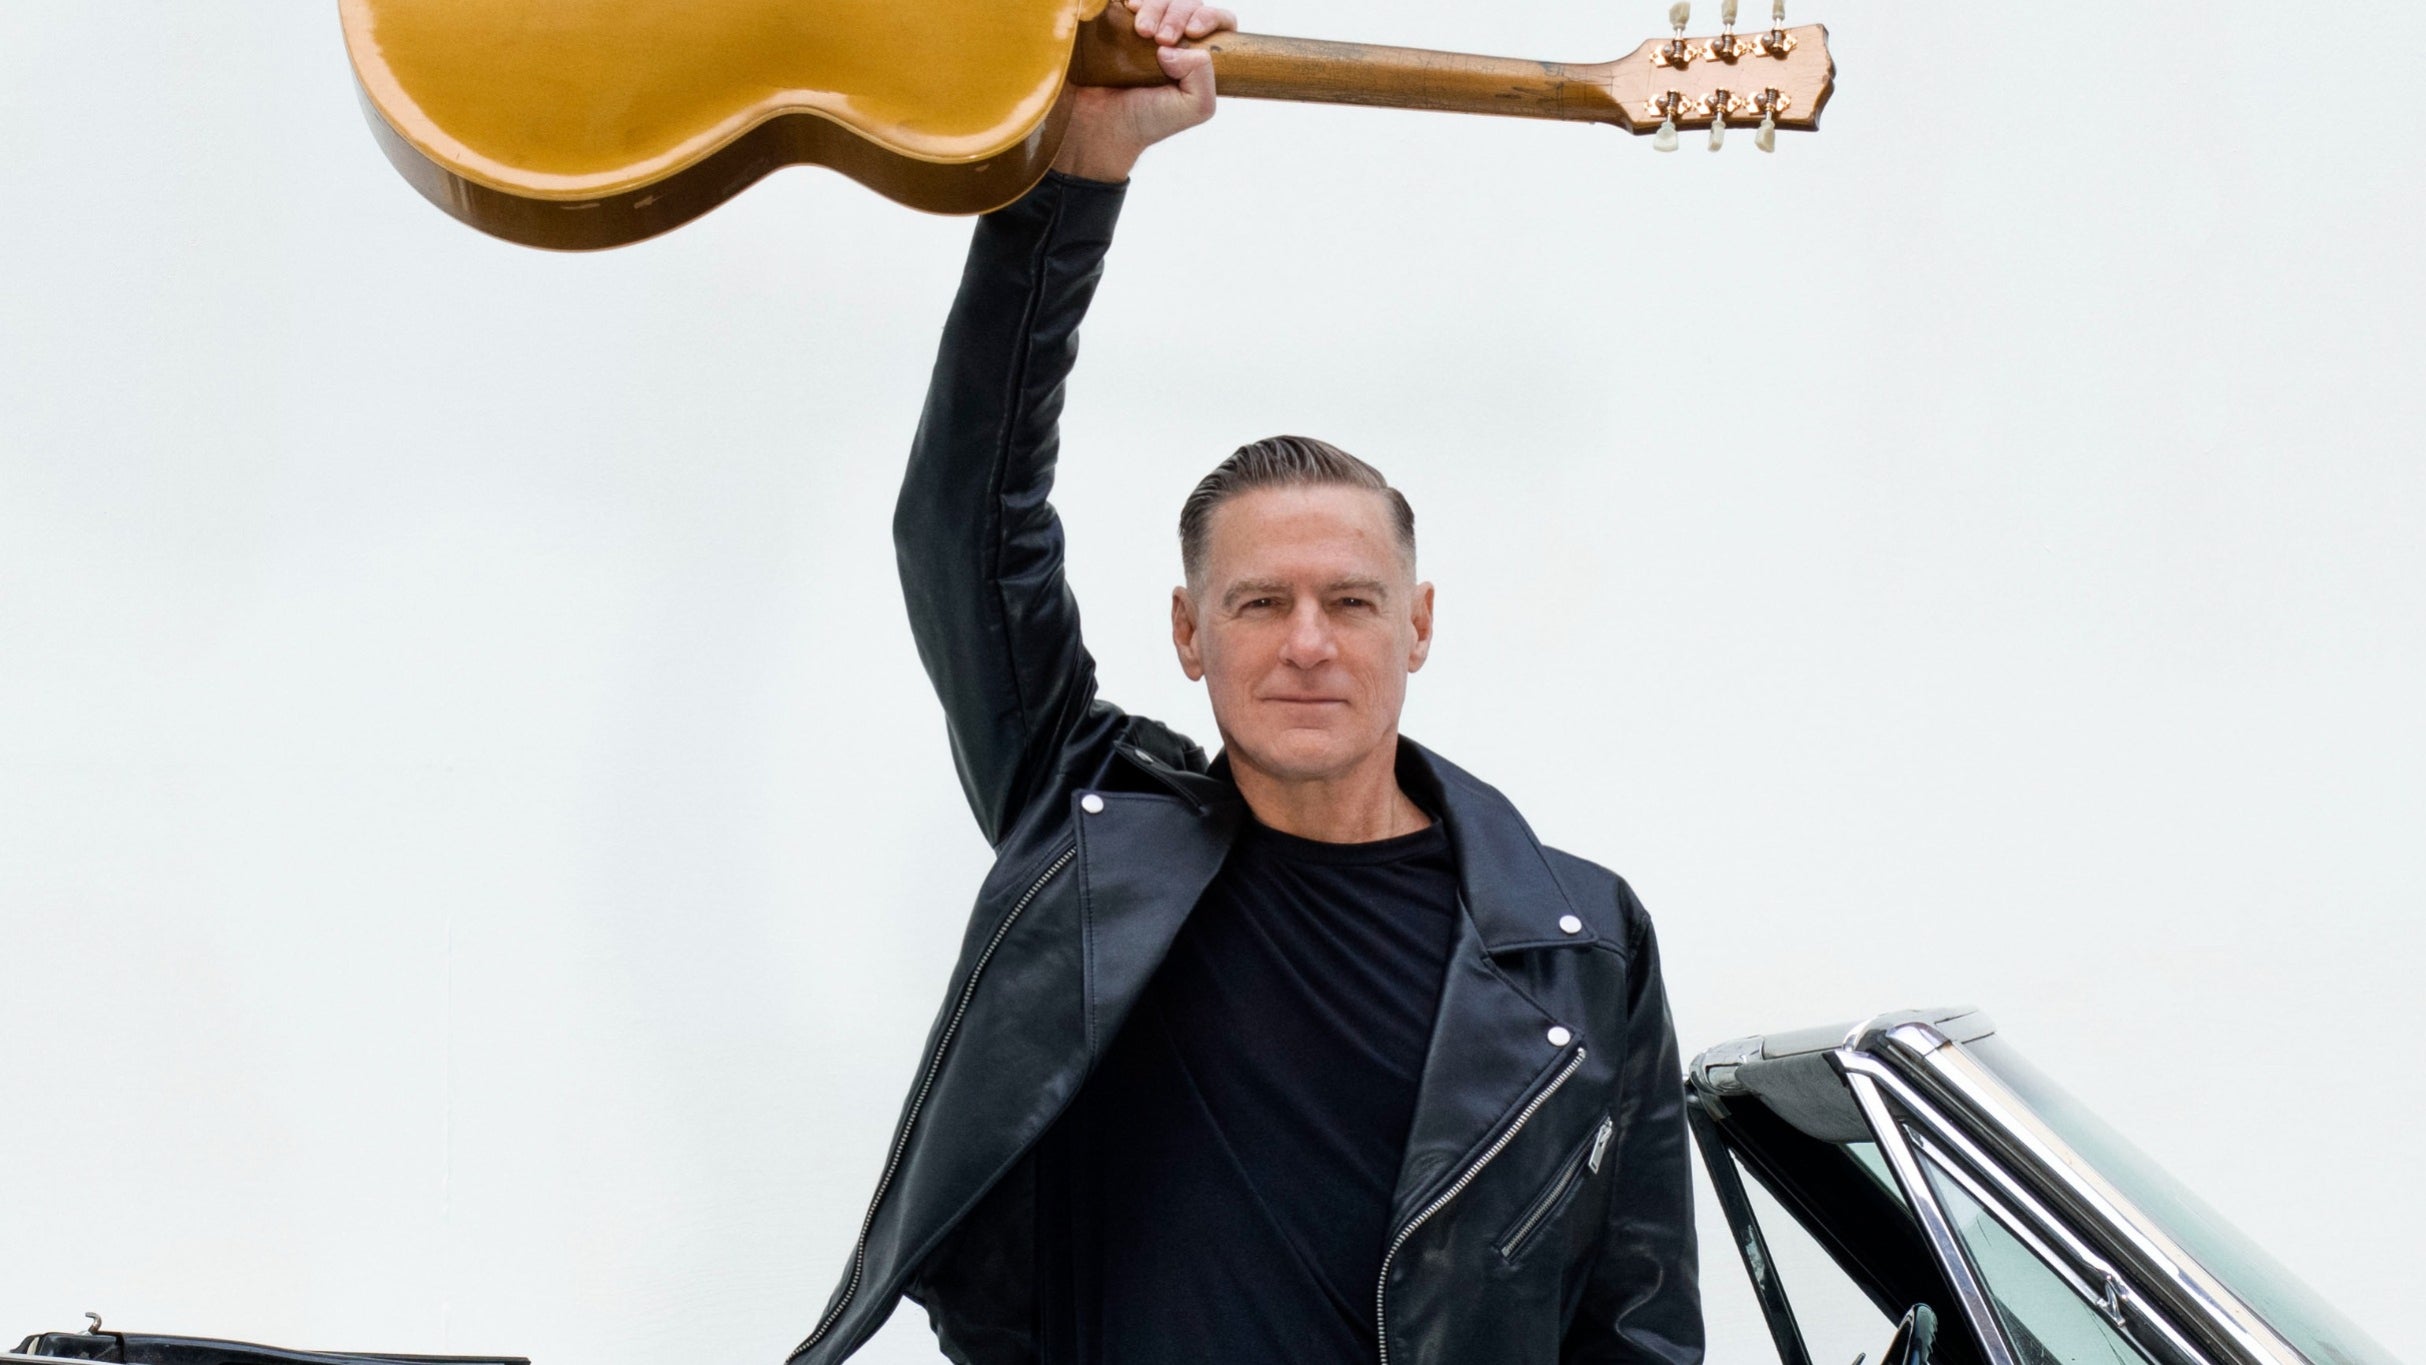 Bryan Adams: So Happy It Hurts w/ Eurythmics Songbook ft. Dave Stewart free presale passcode for early tickets in Corpus Christi